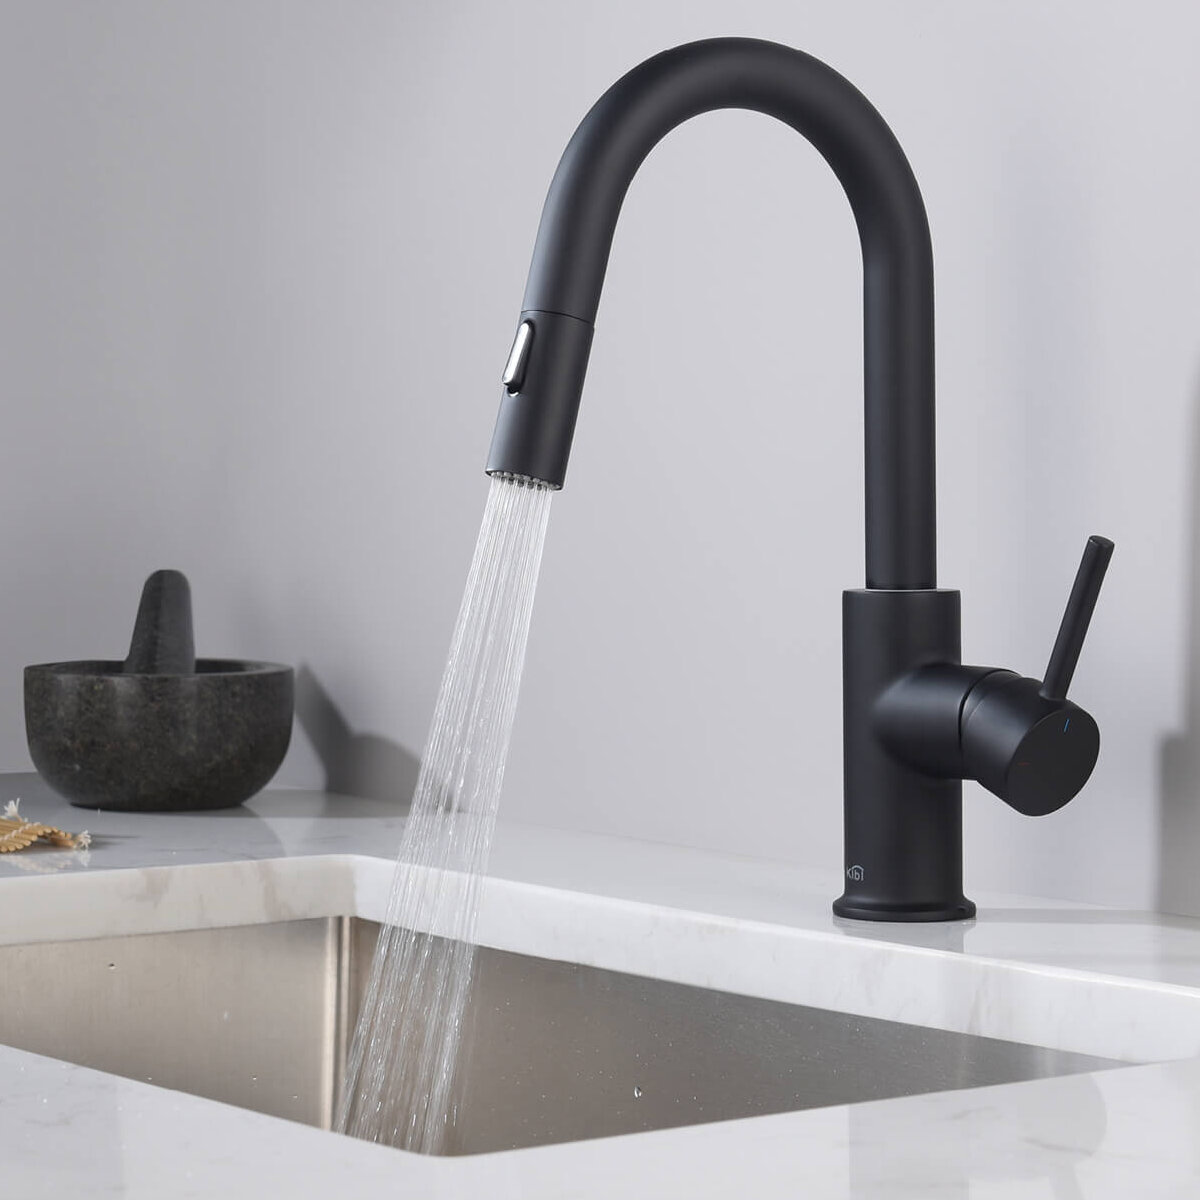 Details about   HB Sleek Looking Contemporary Pull Down Kitchen Faucet-Great for Remodel Upgrade 